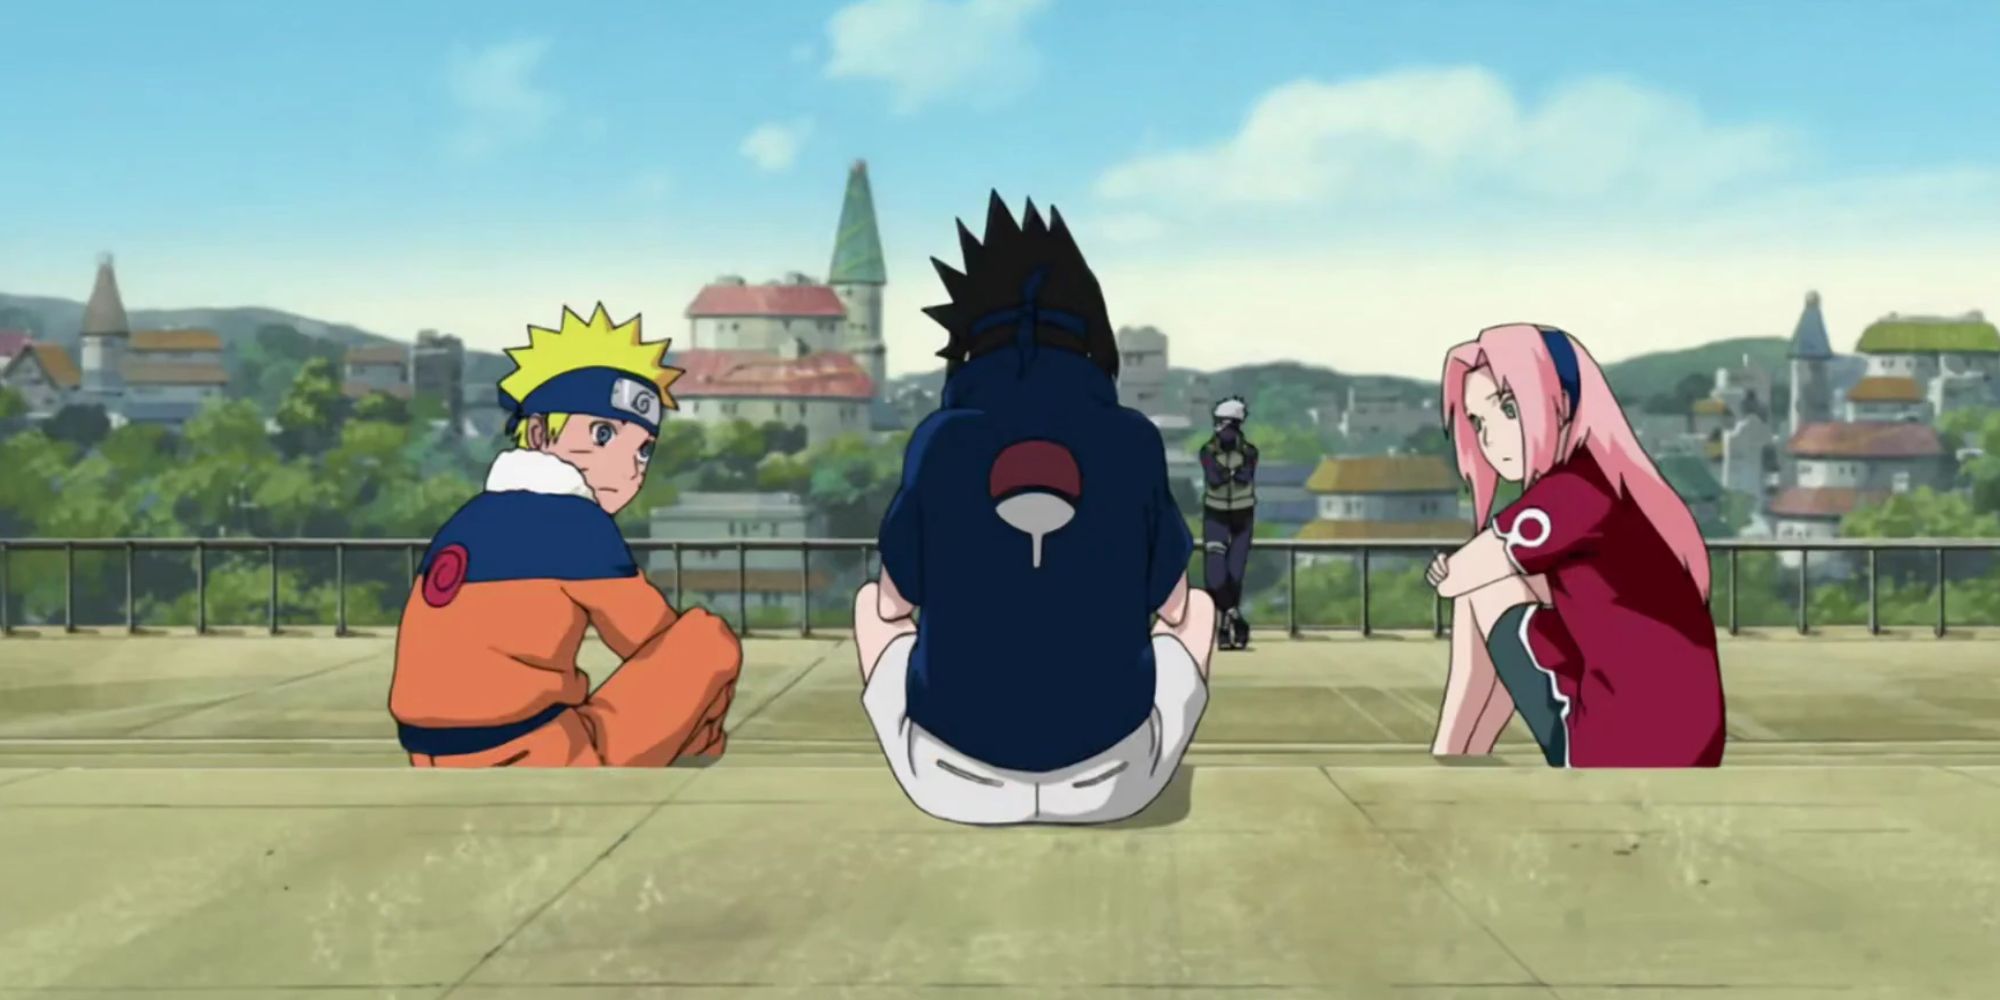 Naruto New Episodes Are Delayed Because They Aren't Good Enough